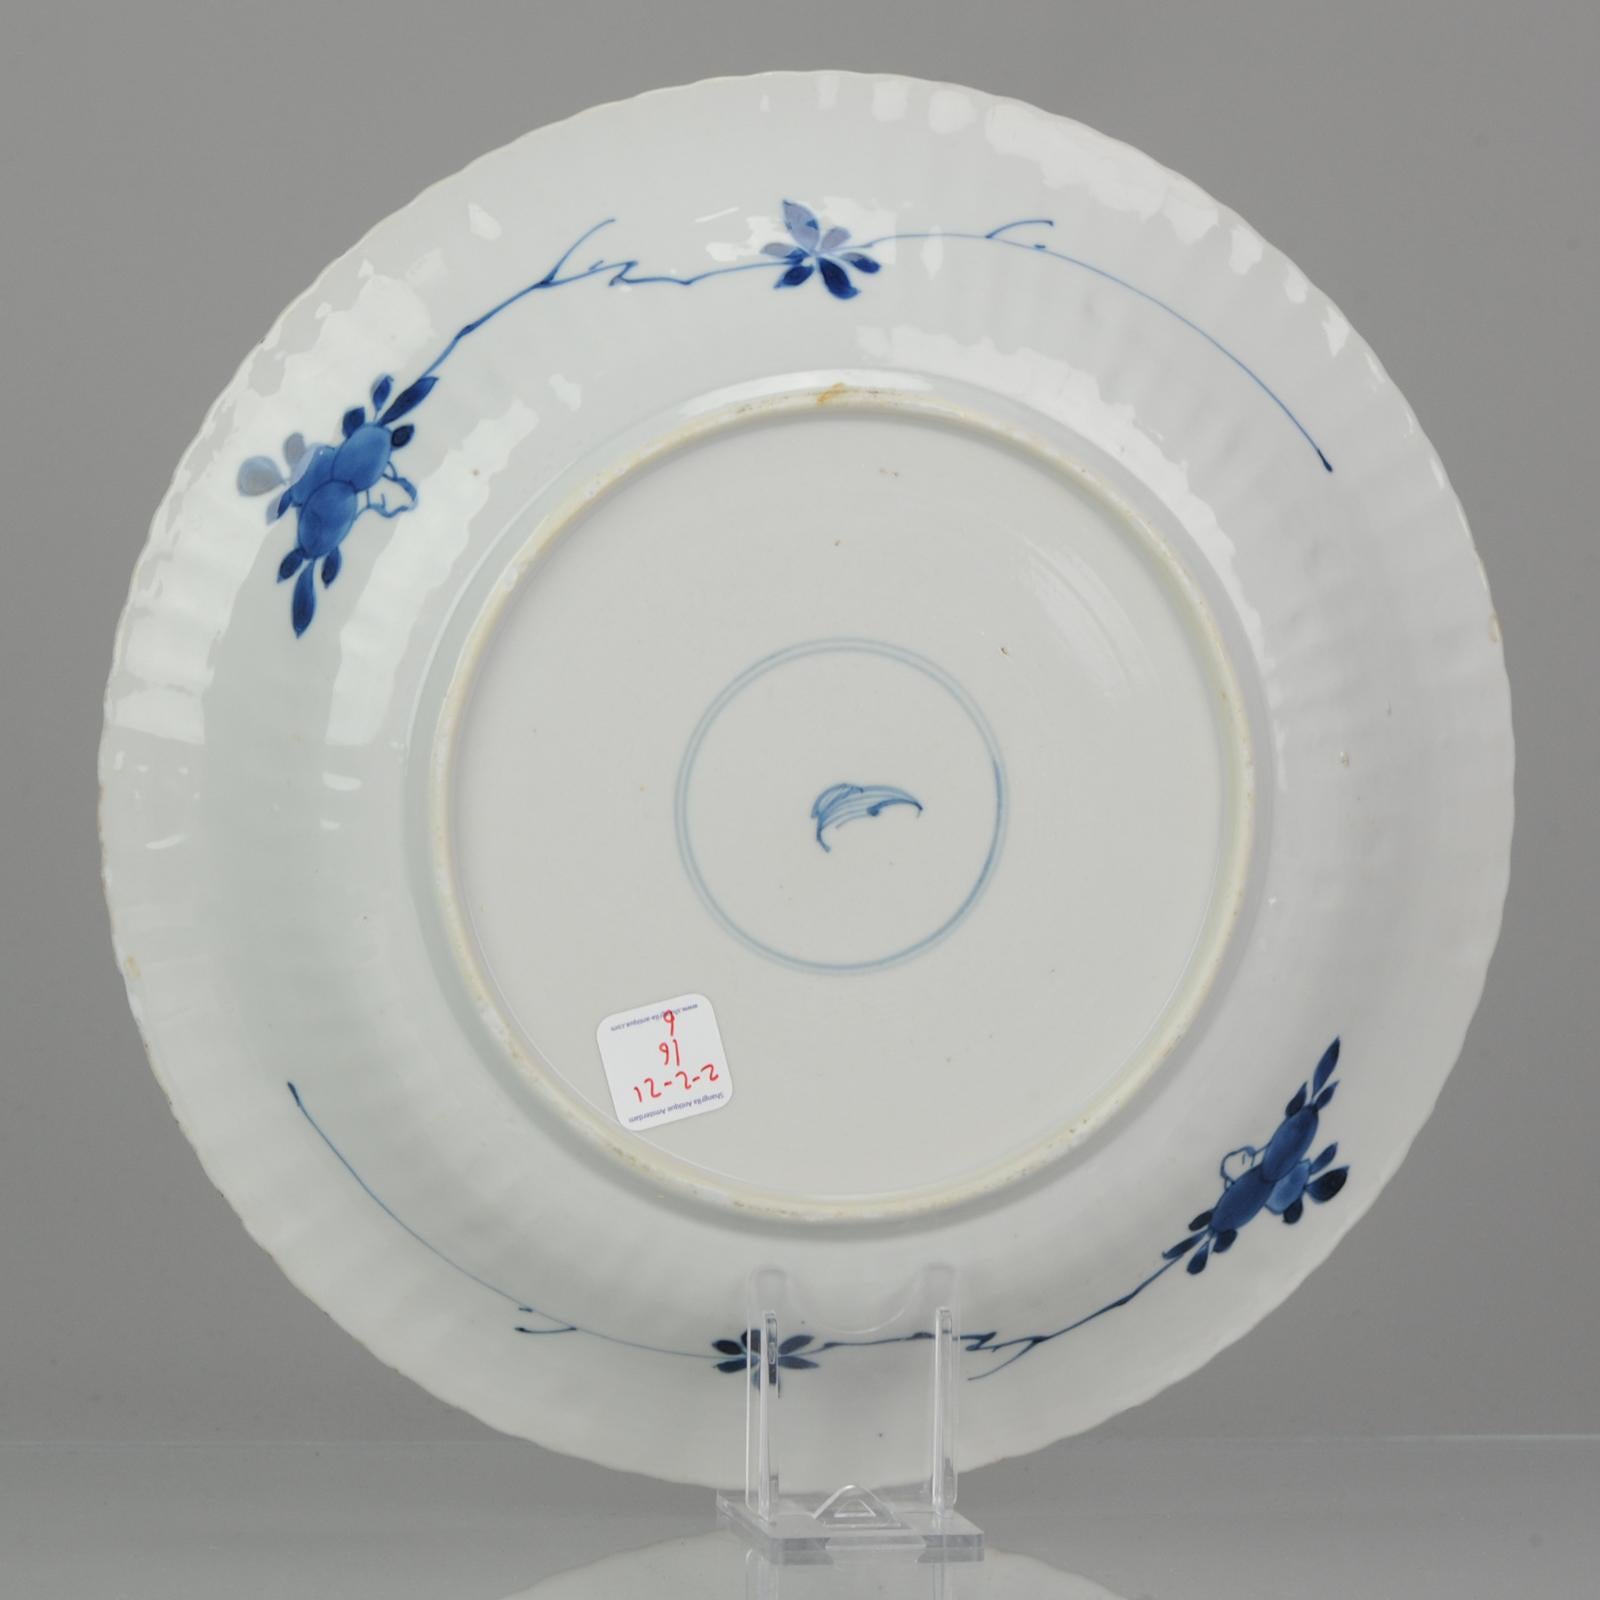 Antique 1700-1722 Kangxi Period Chinese Porcelain Double Plate Marked 4